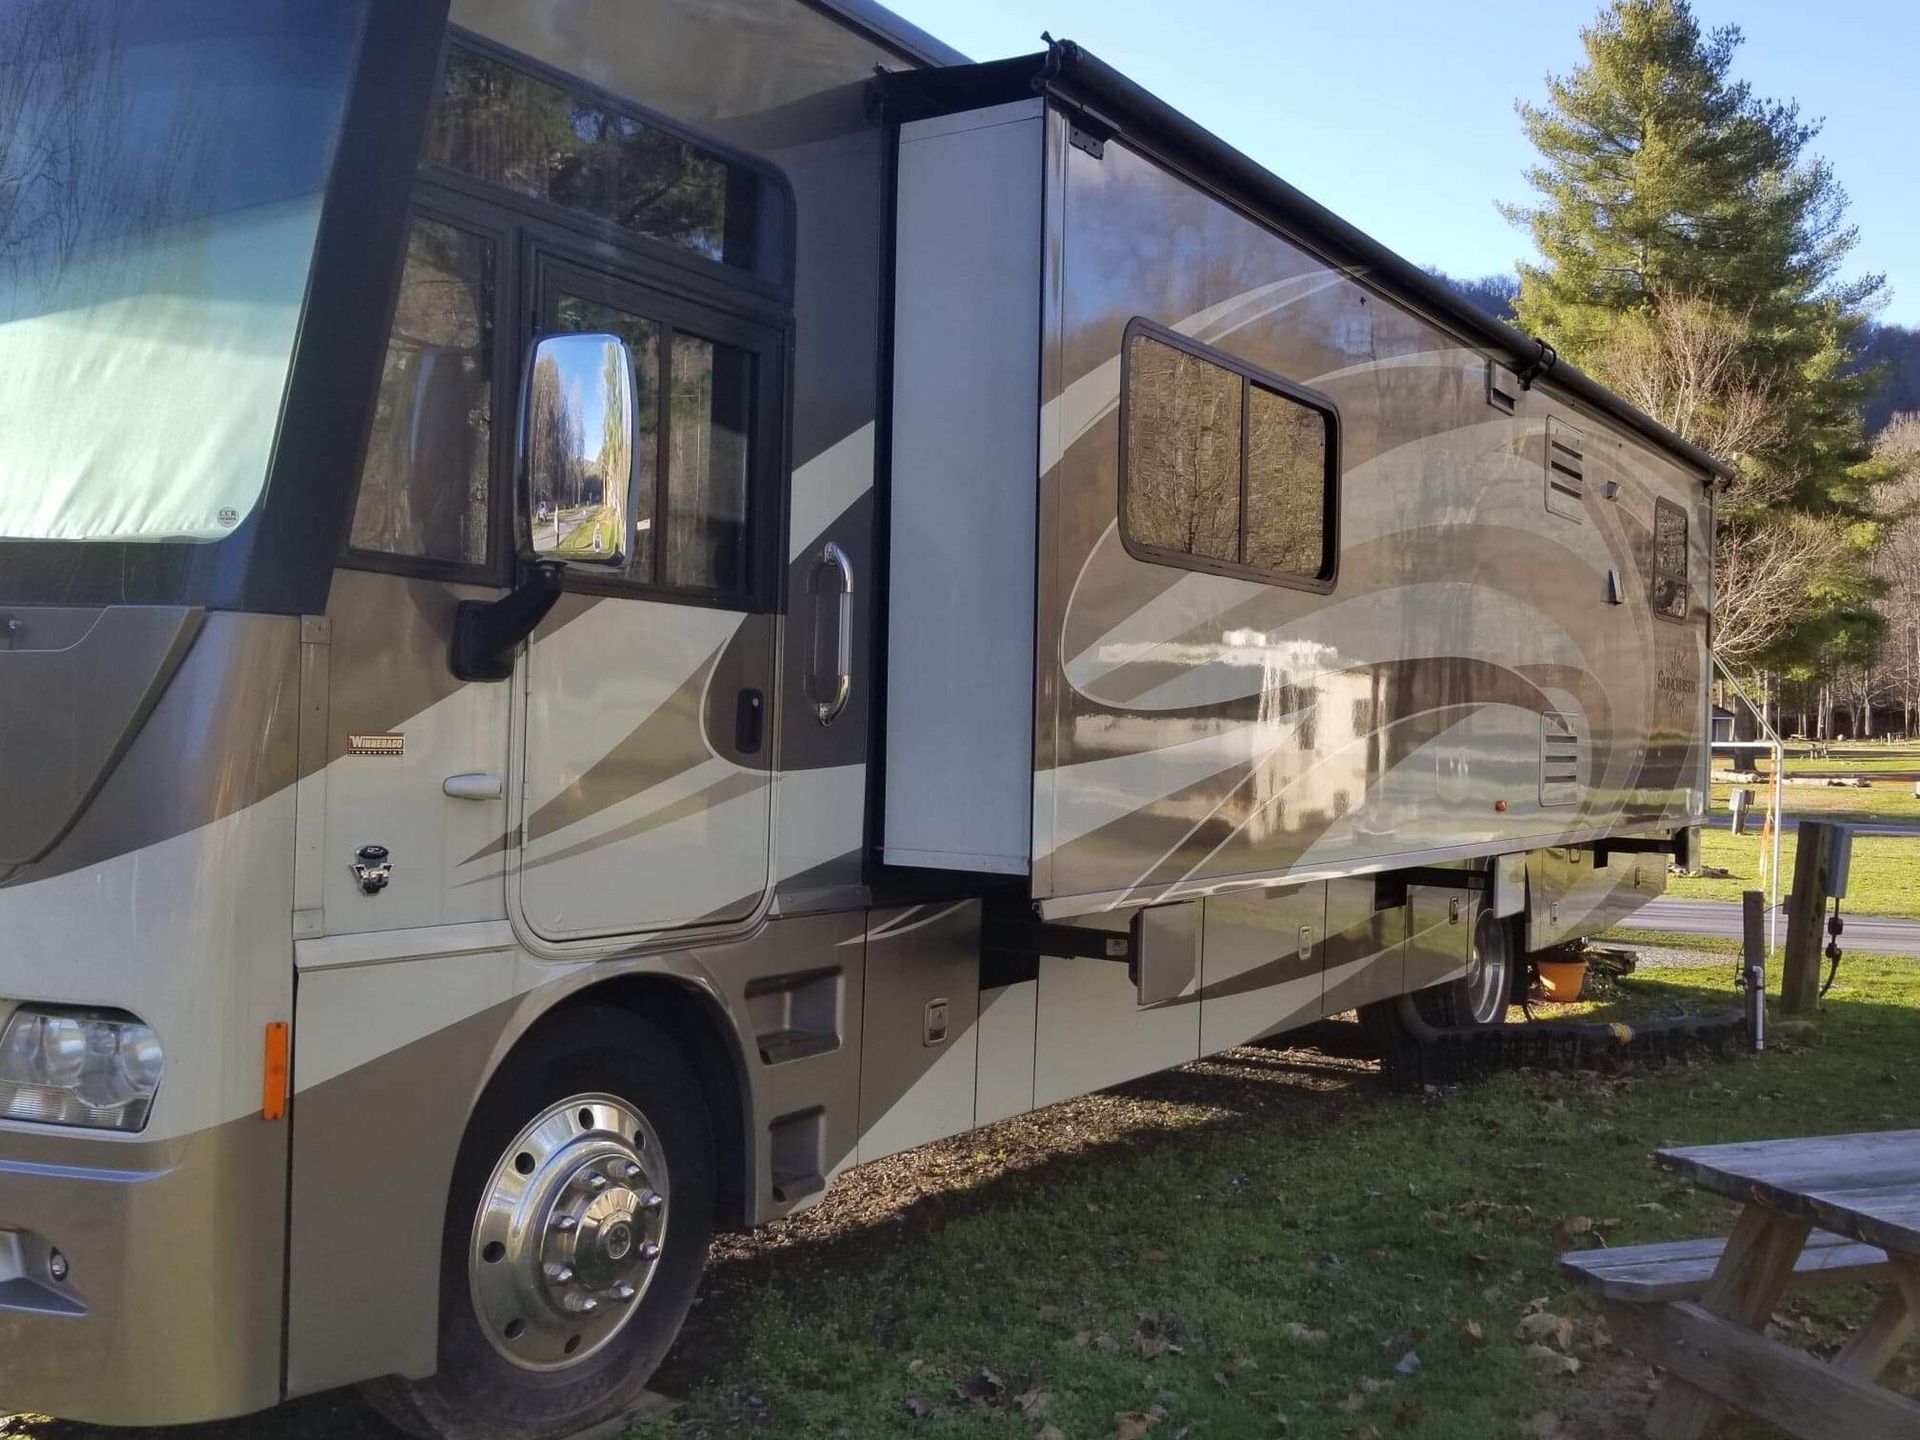 RV / Motor home in excellent condition!